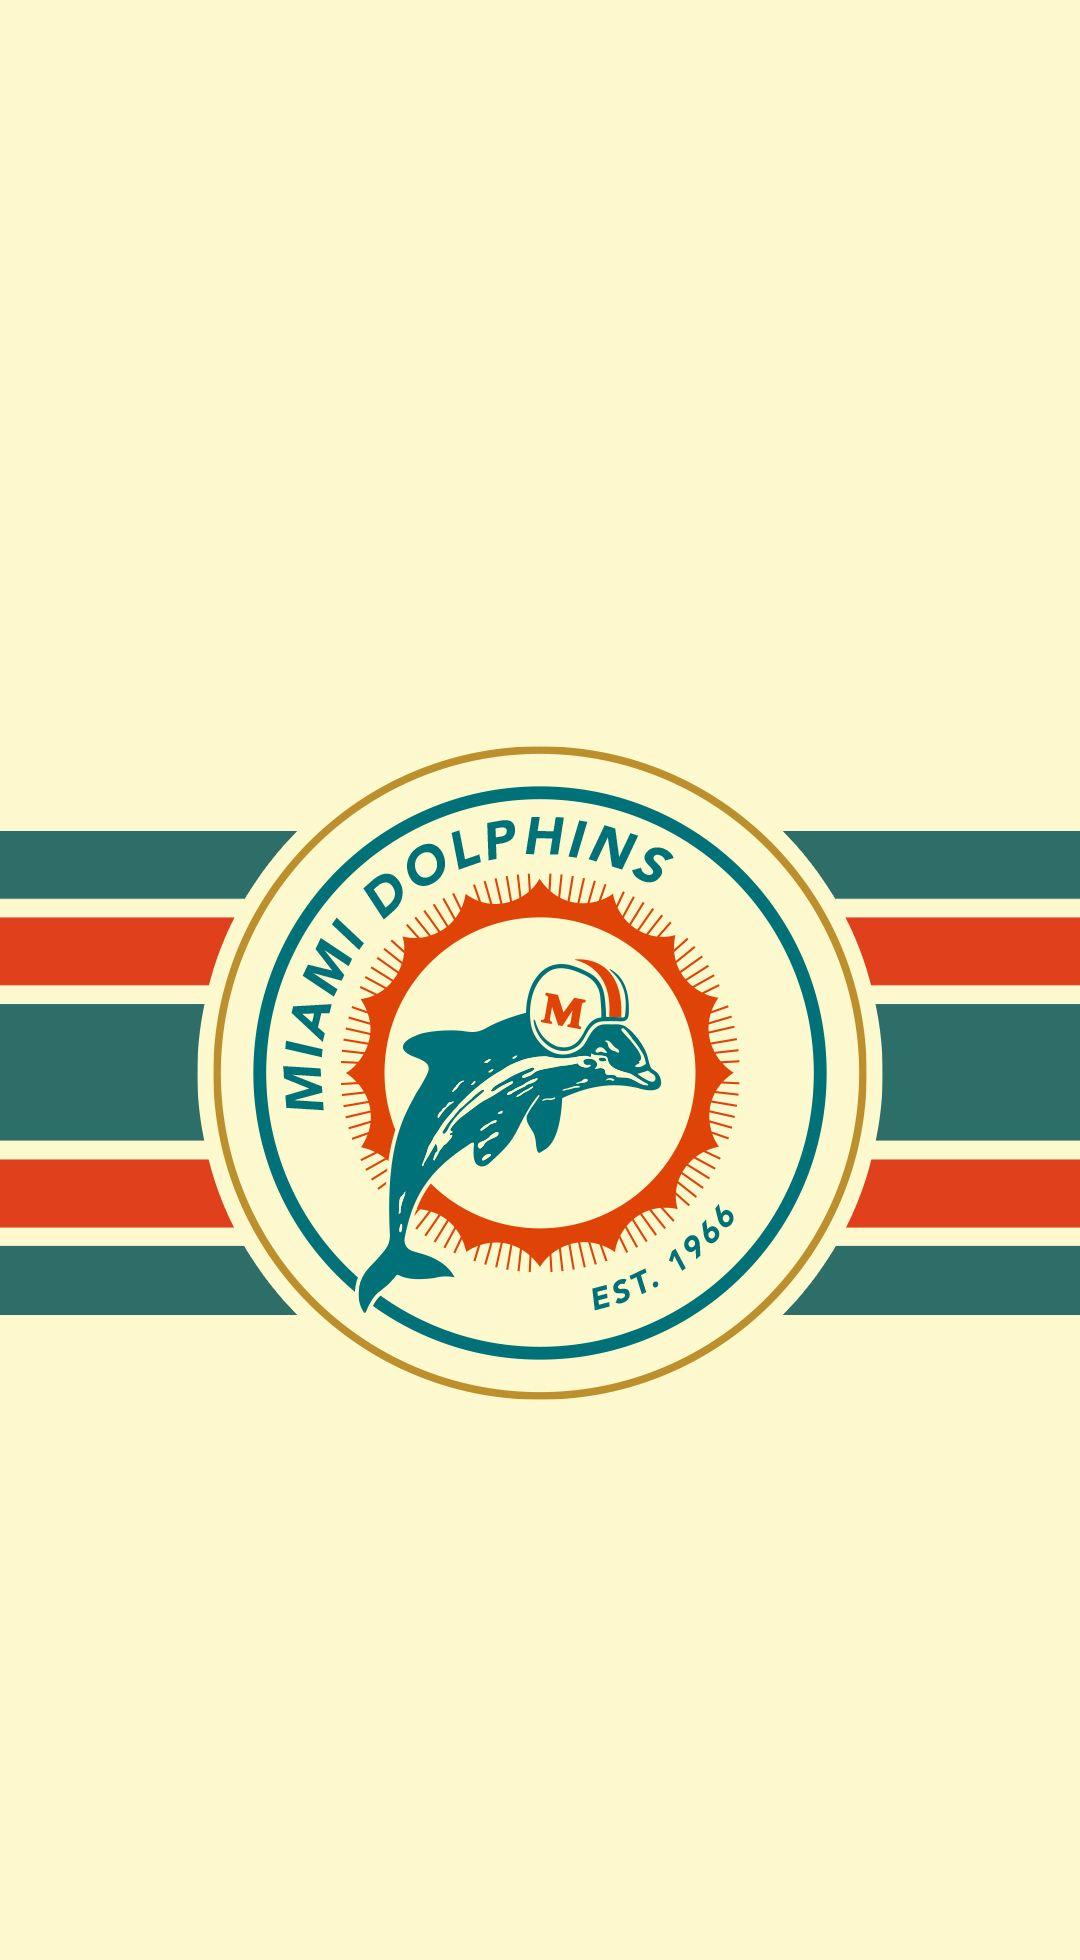 Download wallpapers Miami Dolphins 4k logo grunge art American football  team emblem blue background paint art NFL Miami Florida USA  National Football League creative art for desktop with resolution  3840x2400 High Quality